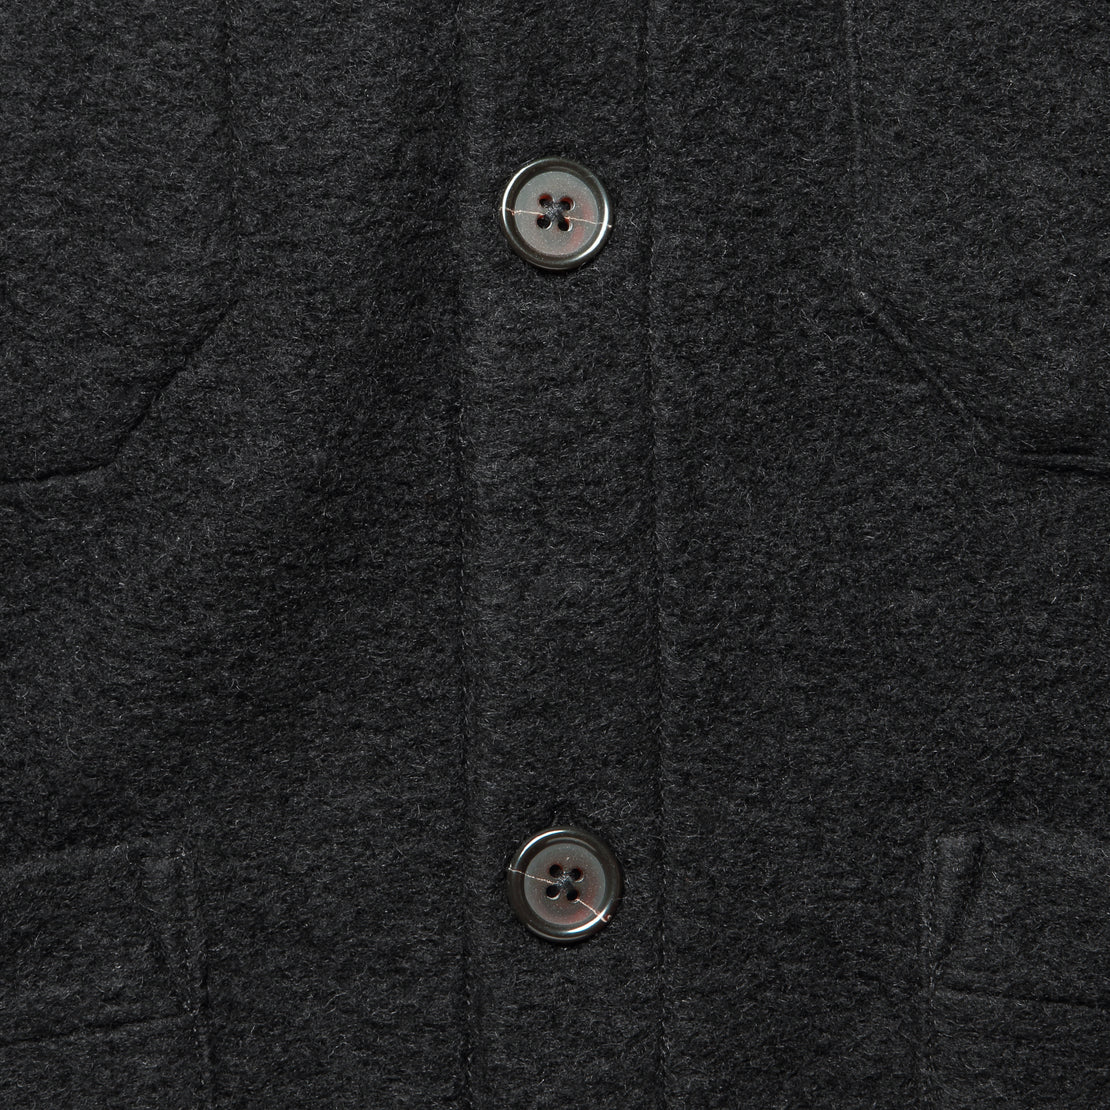 Wool Fleece Cardigan - Black - Universal Works - STAG Provisions - Tops - Sweater